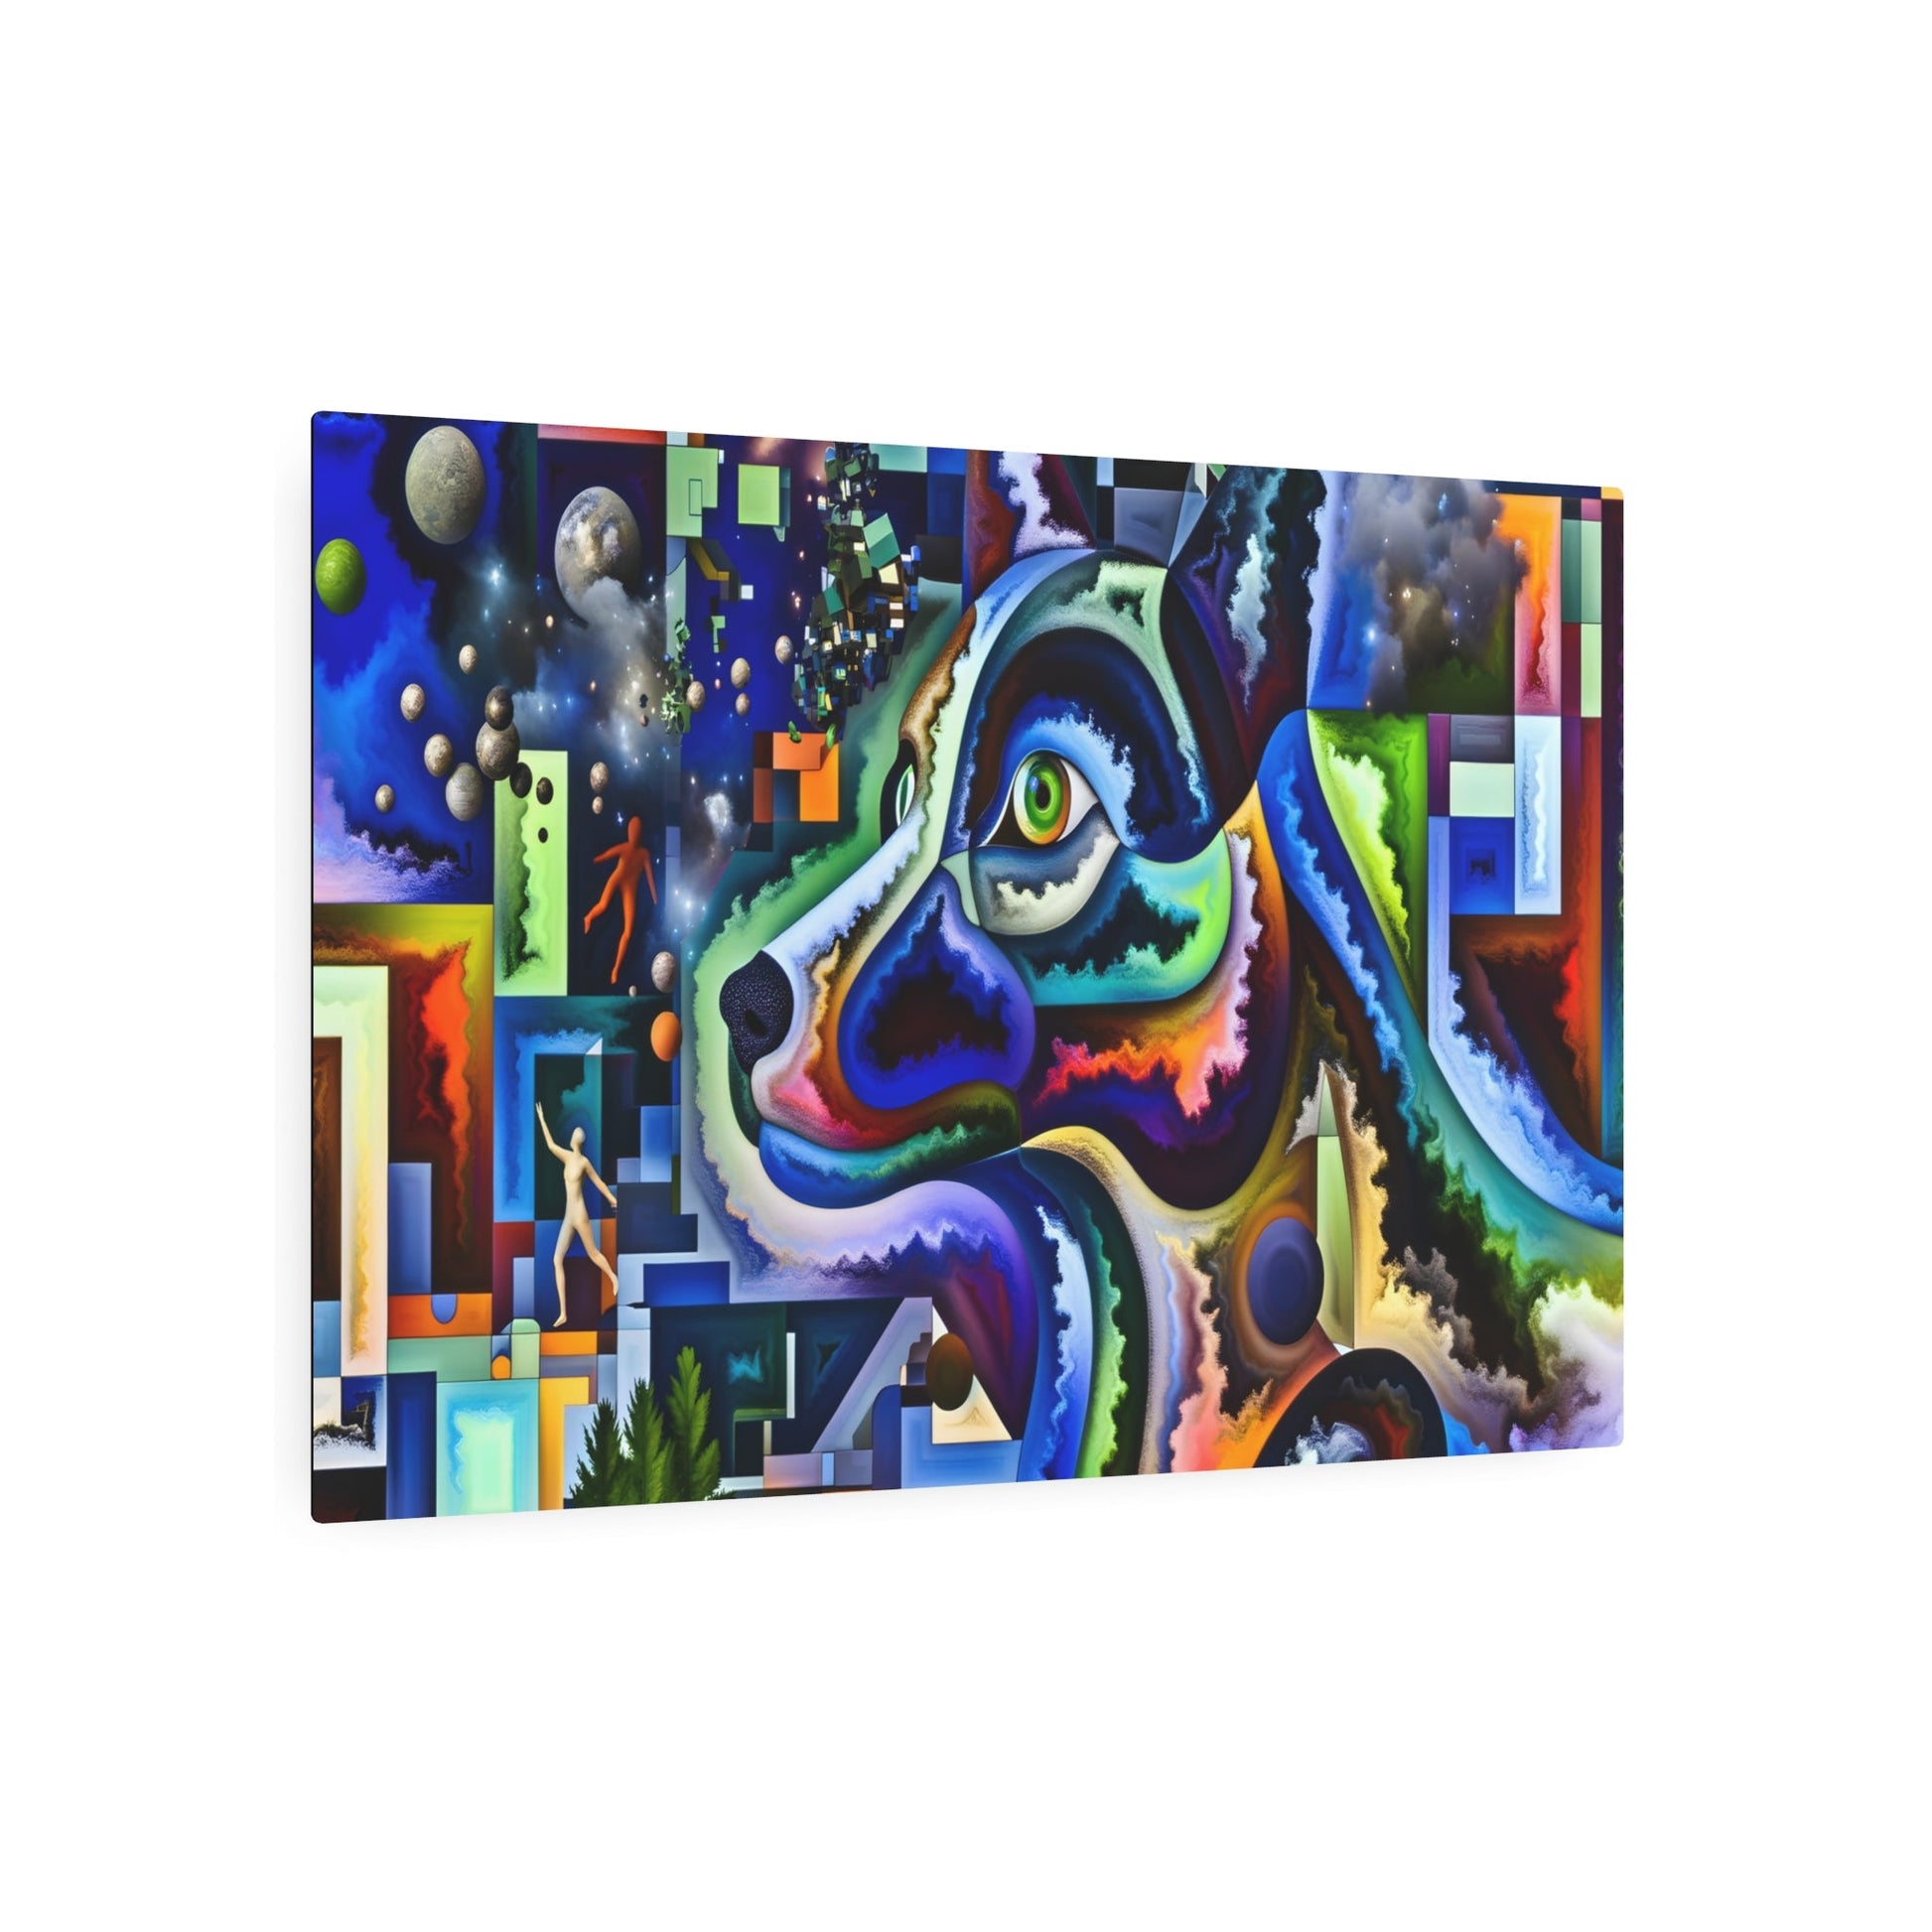 Metal Poster Art | "Modern Contemporary Surrealism Art - Cosmic Canine Portrait with Abstract Cityscape and Forest Transformation, Bold Contrasting Colors & Floating Elements" - Metal Poster Art 36″ x 24″ (Horizontal) 0.12''